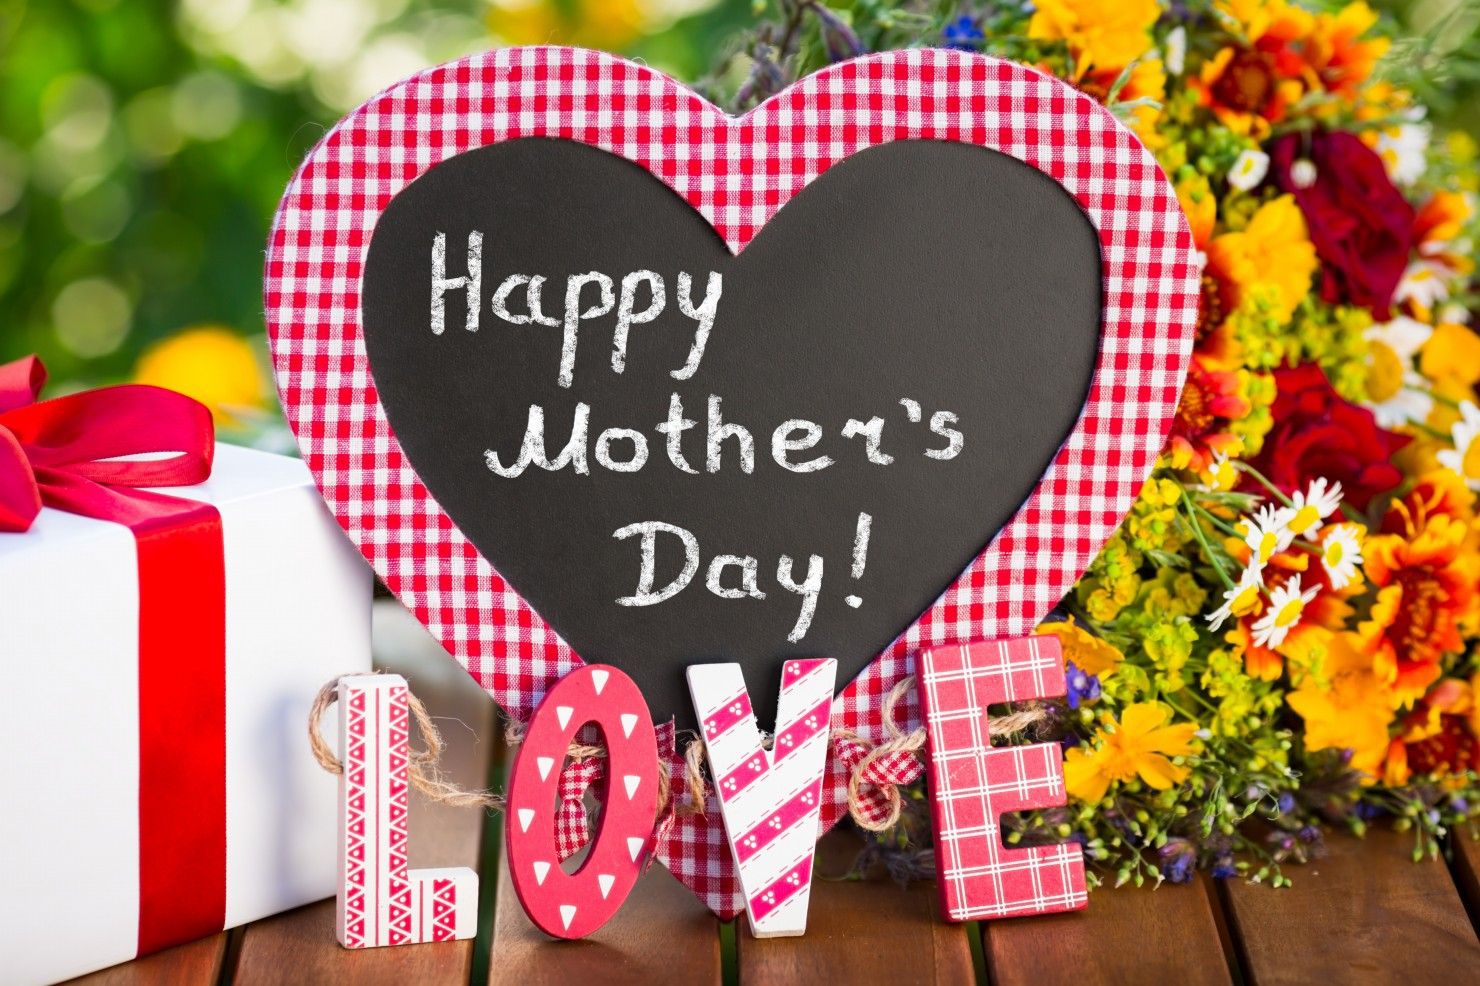 Free download Mothers Day 2018 HD Image Wallpapers Beautiful.